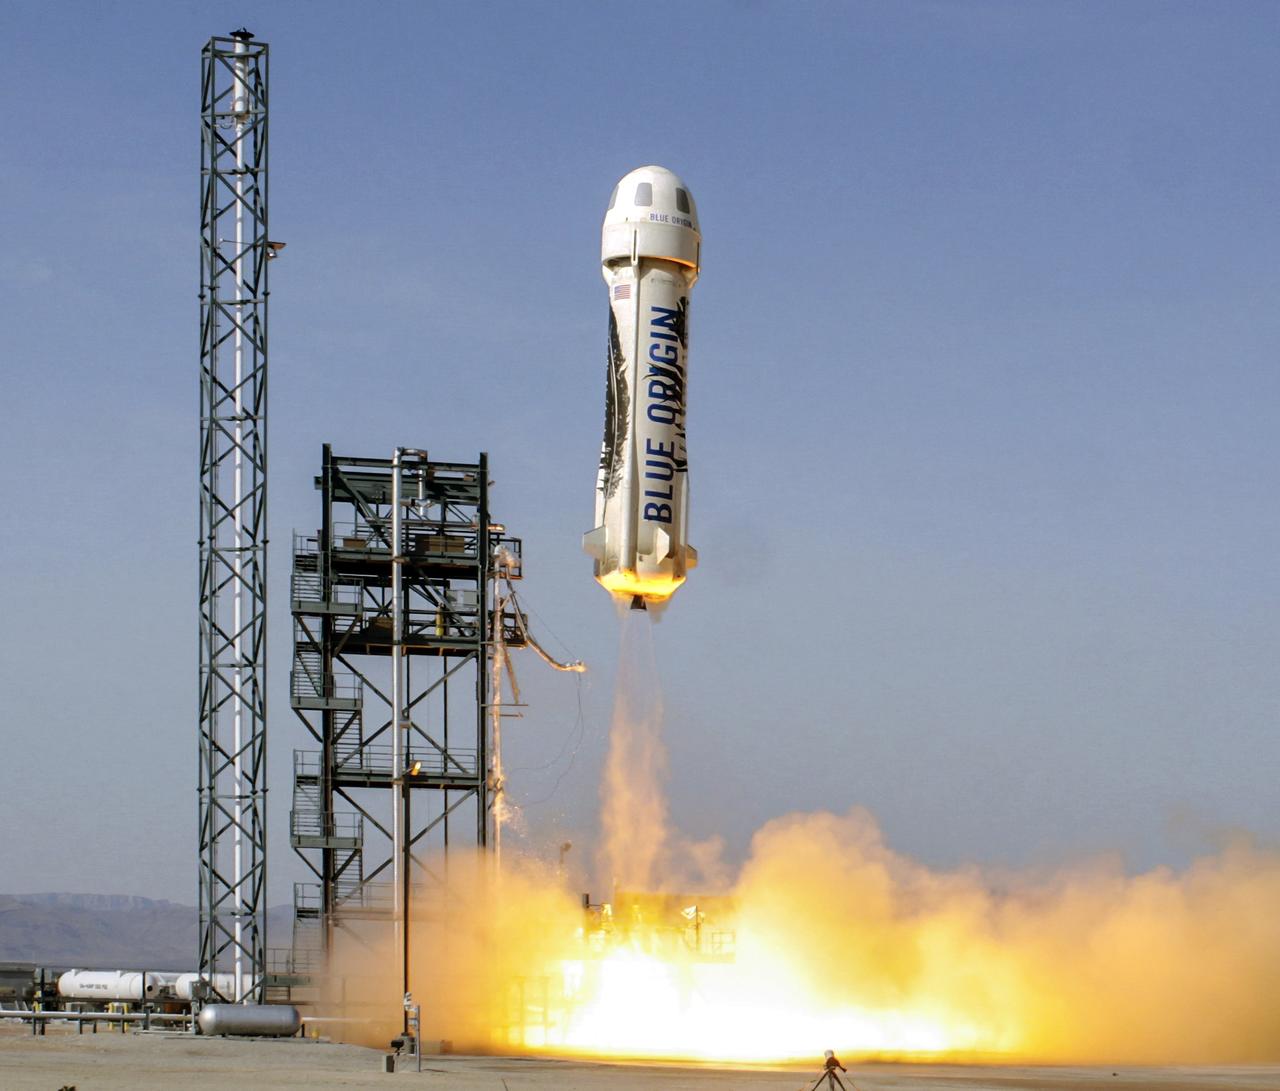 "Scheduling Conflicts" - Person Who Paid $28 Million For Space Trip With Jeff Bezos Backs Out